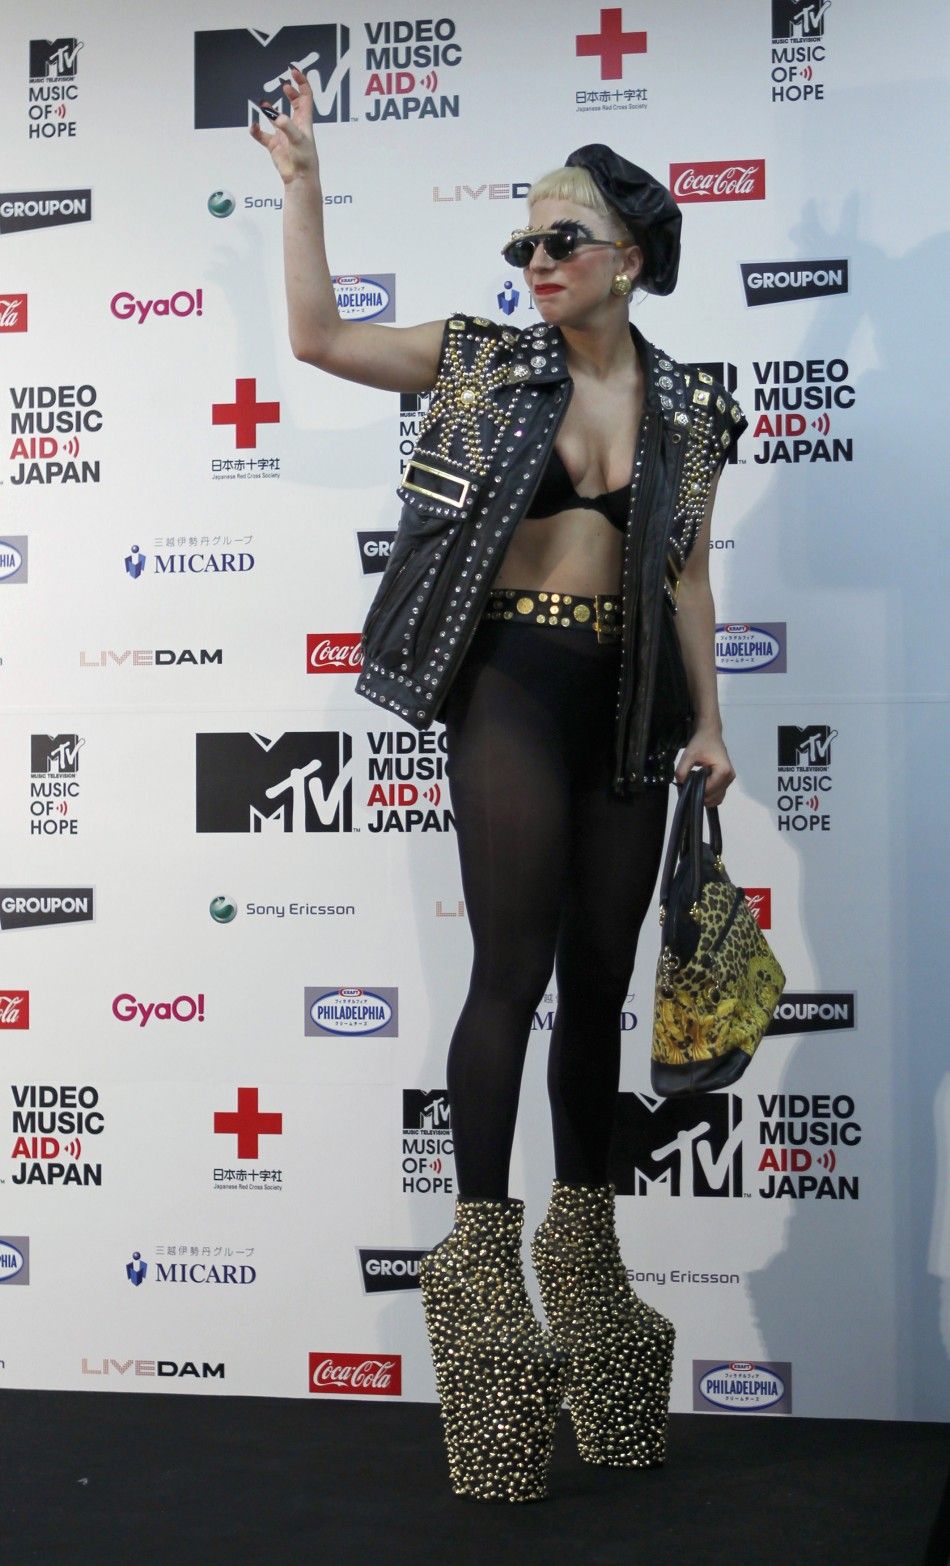 U.S. singer Lady Gaga attends a news conference after performing at the MTV Video Music Aid Japan in China